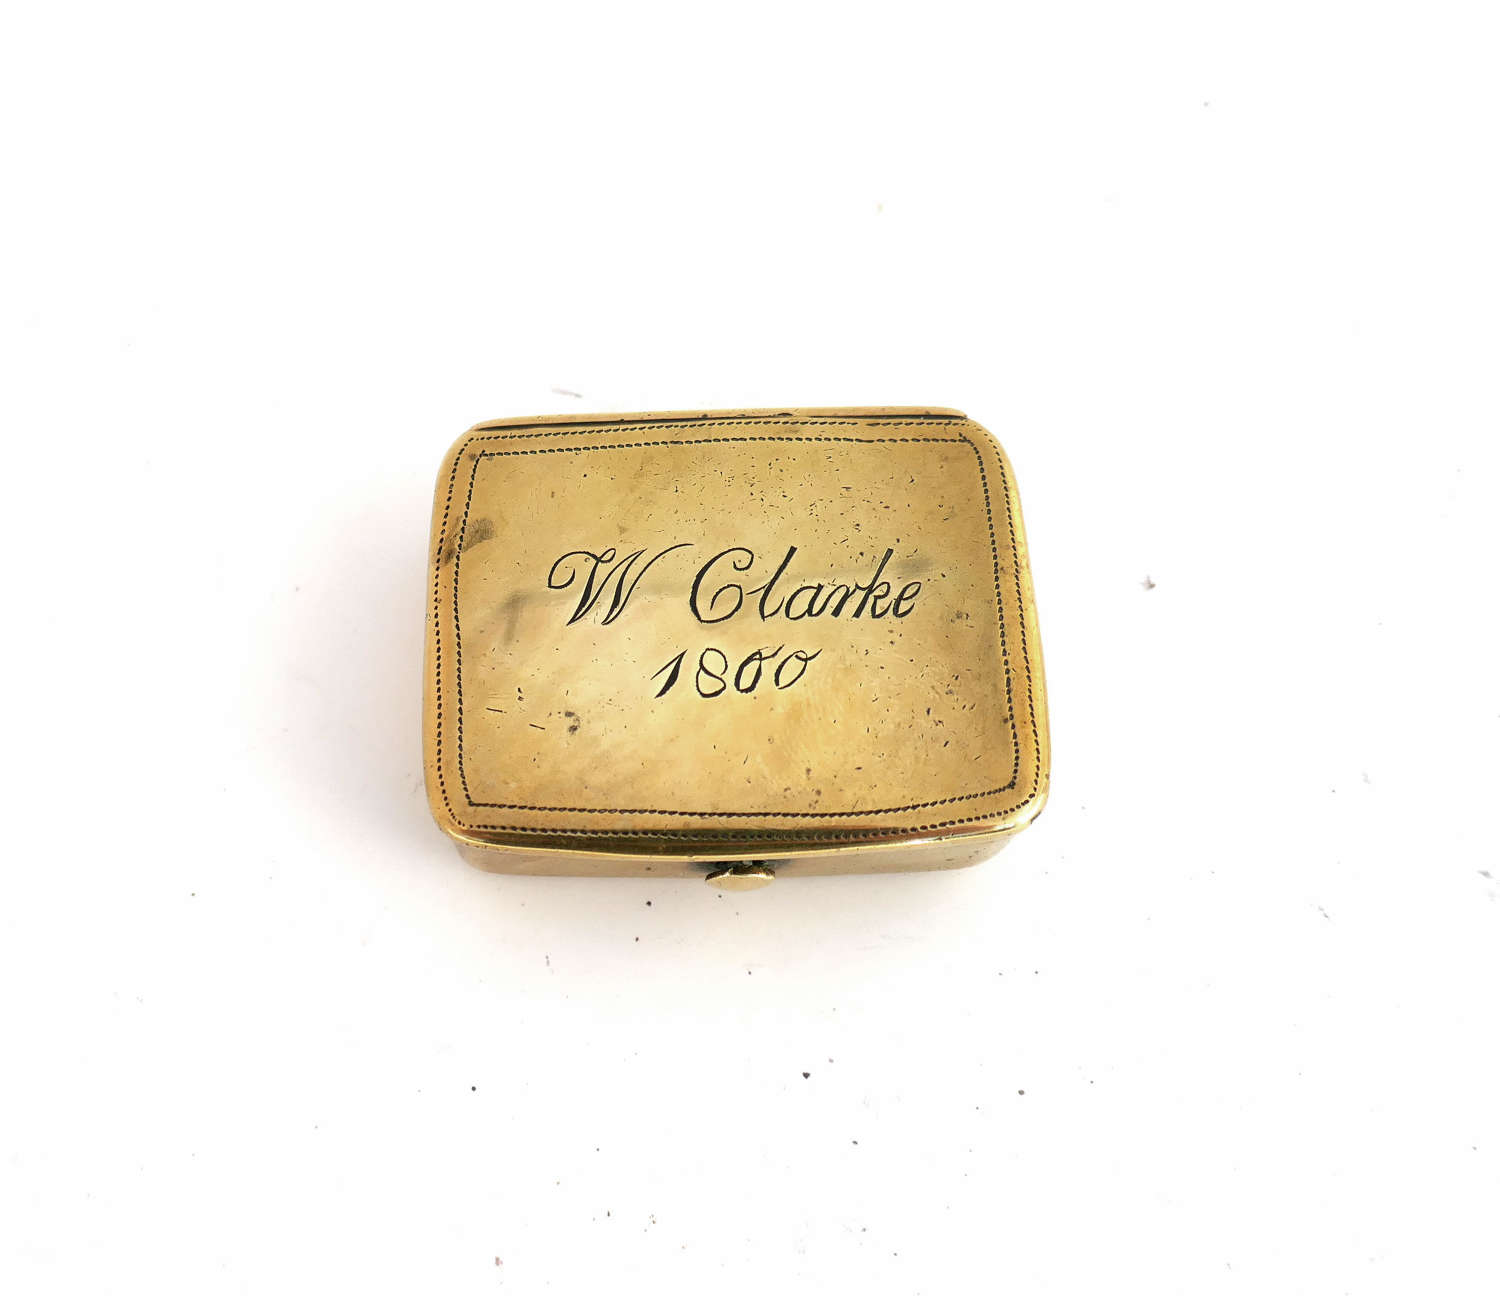 Antique Brass 19thc Snuff Box With Owners Name W Clarke - Dated 1800.